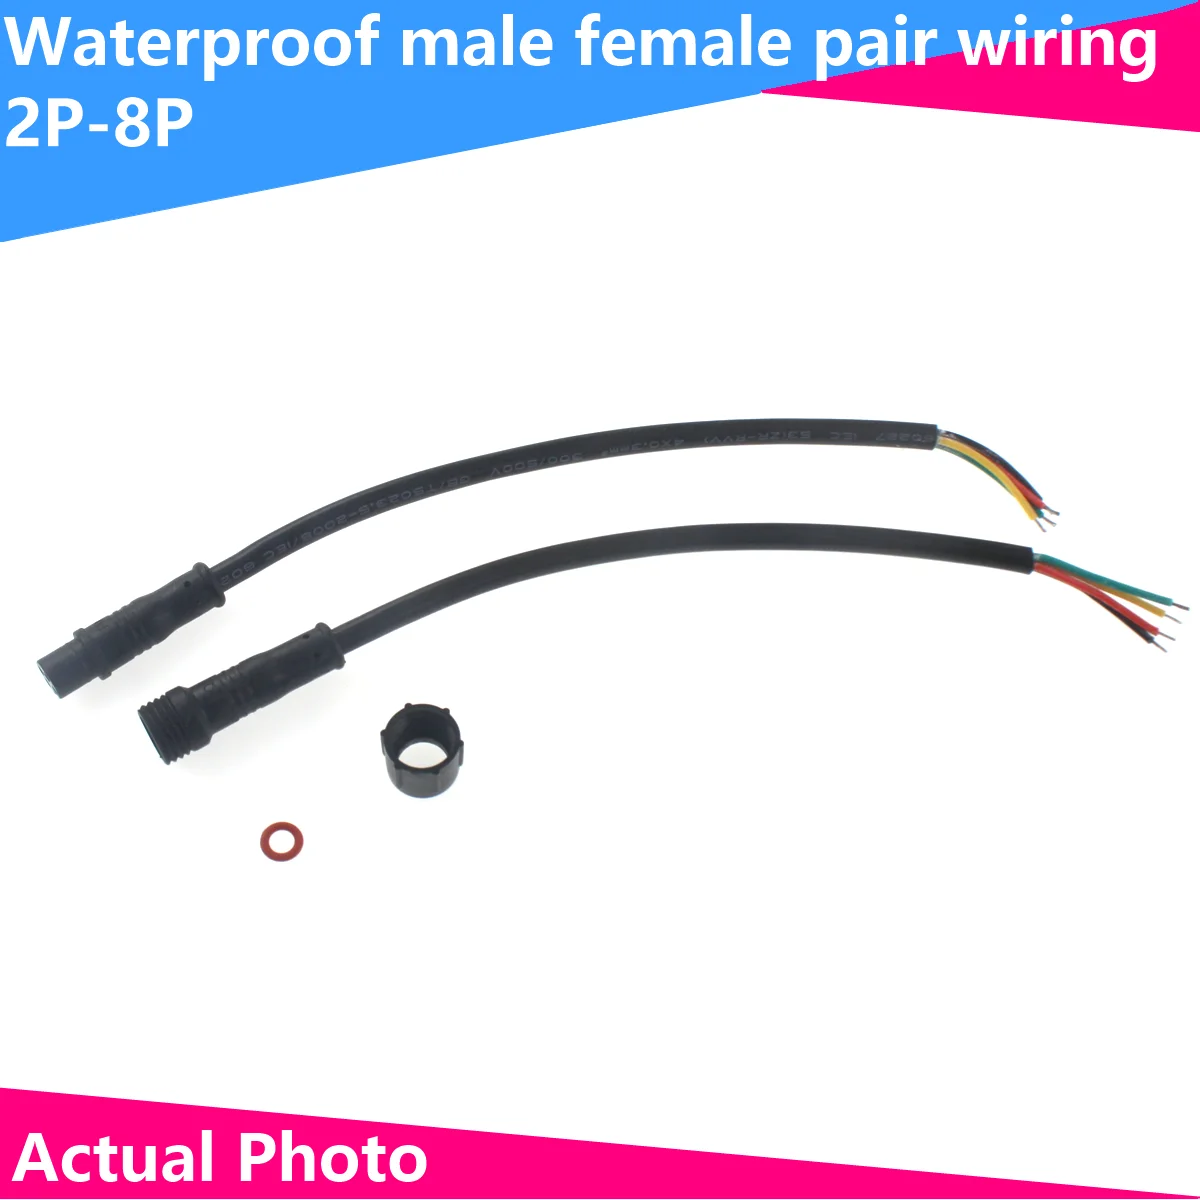 Waterproof Male Female Docking Plug 2/3/4/5/8P pin Aviation Industry Power Supply Quick Connector Outdoor LED Wire Socket AWG 2 prong pin y2m 2tkf y2m 2tj y2m y21m socket connector aviation plug tig mig gun torch welding part